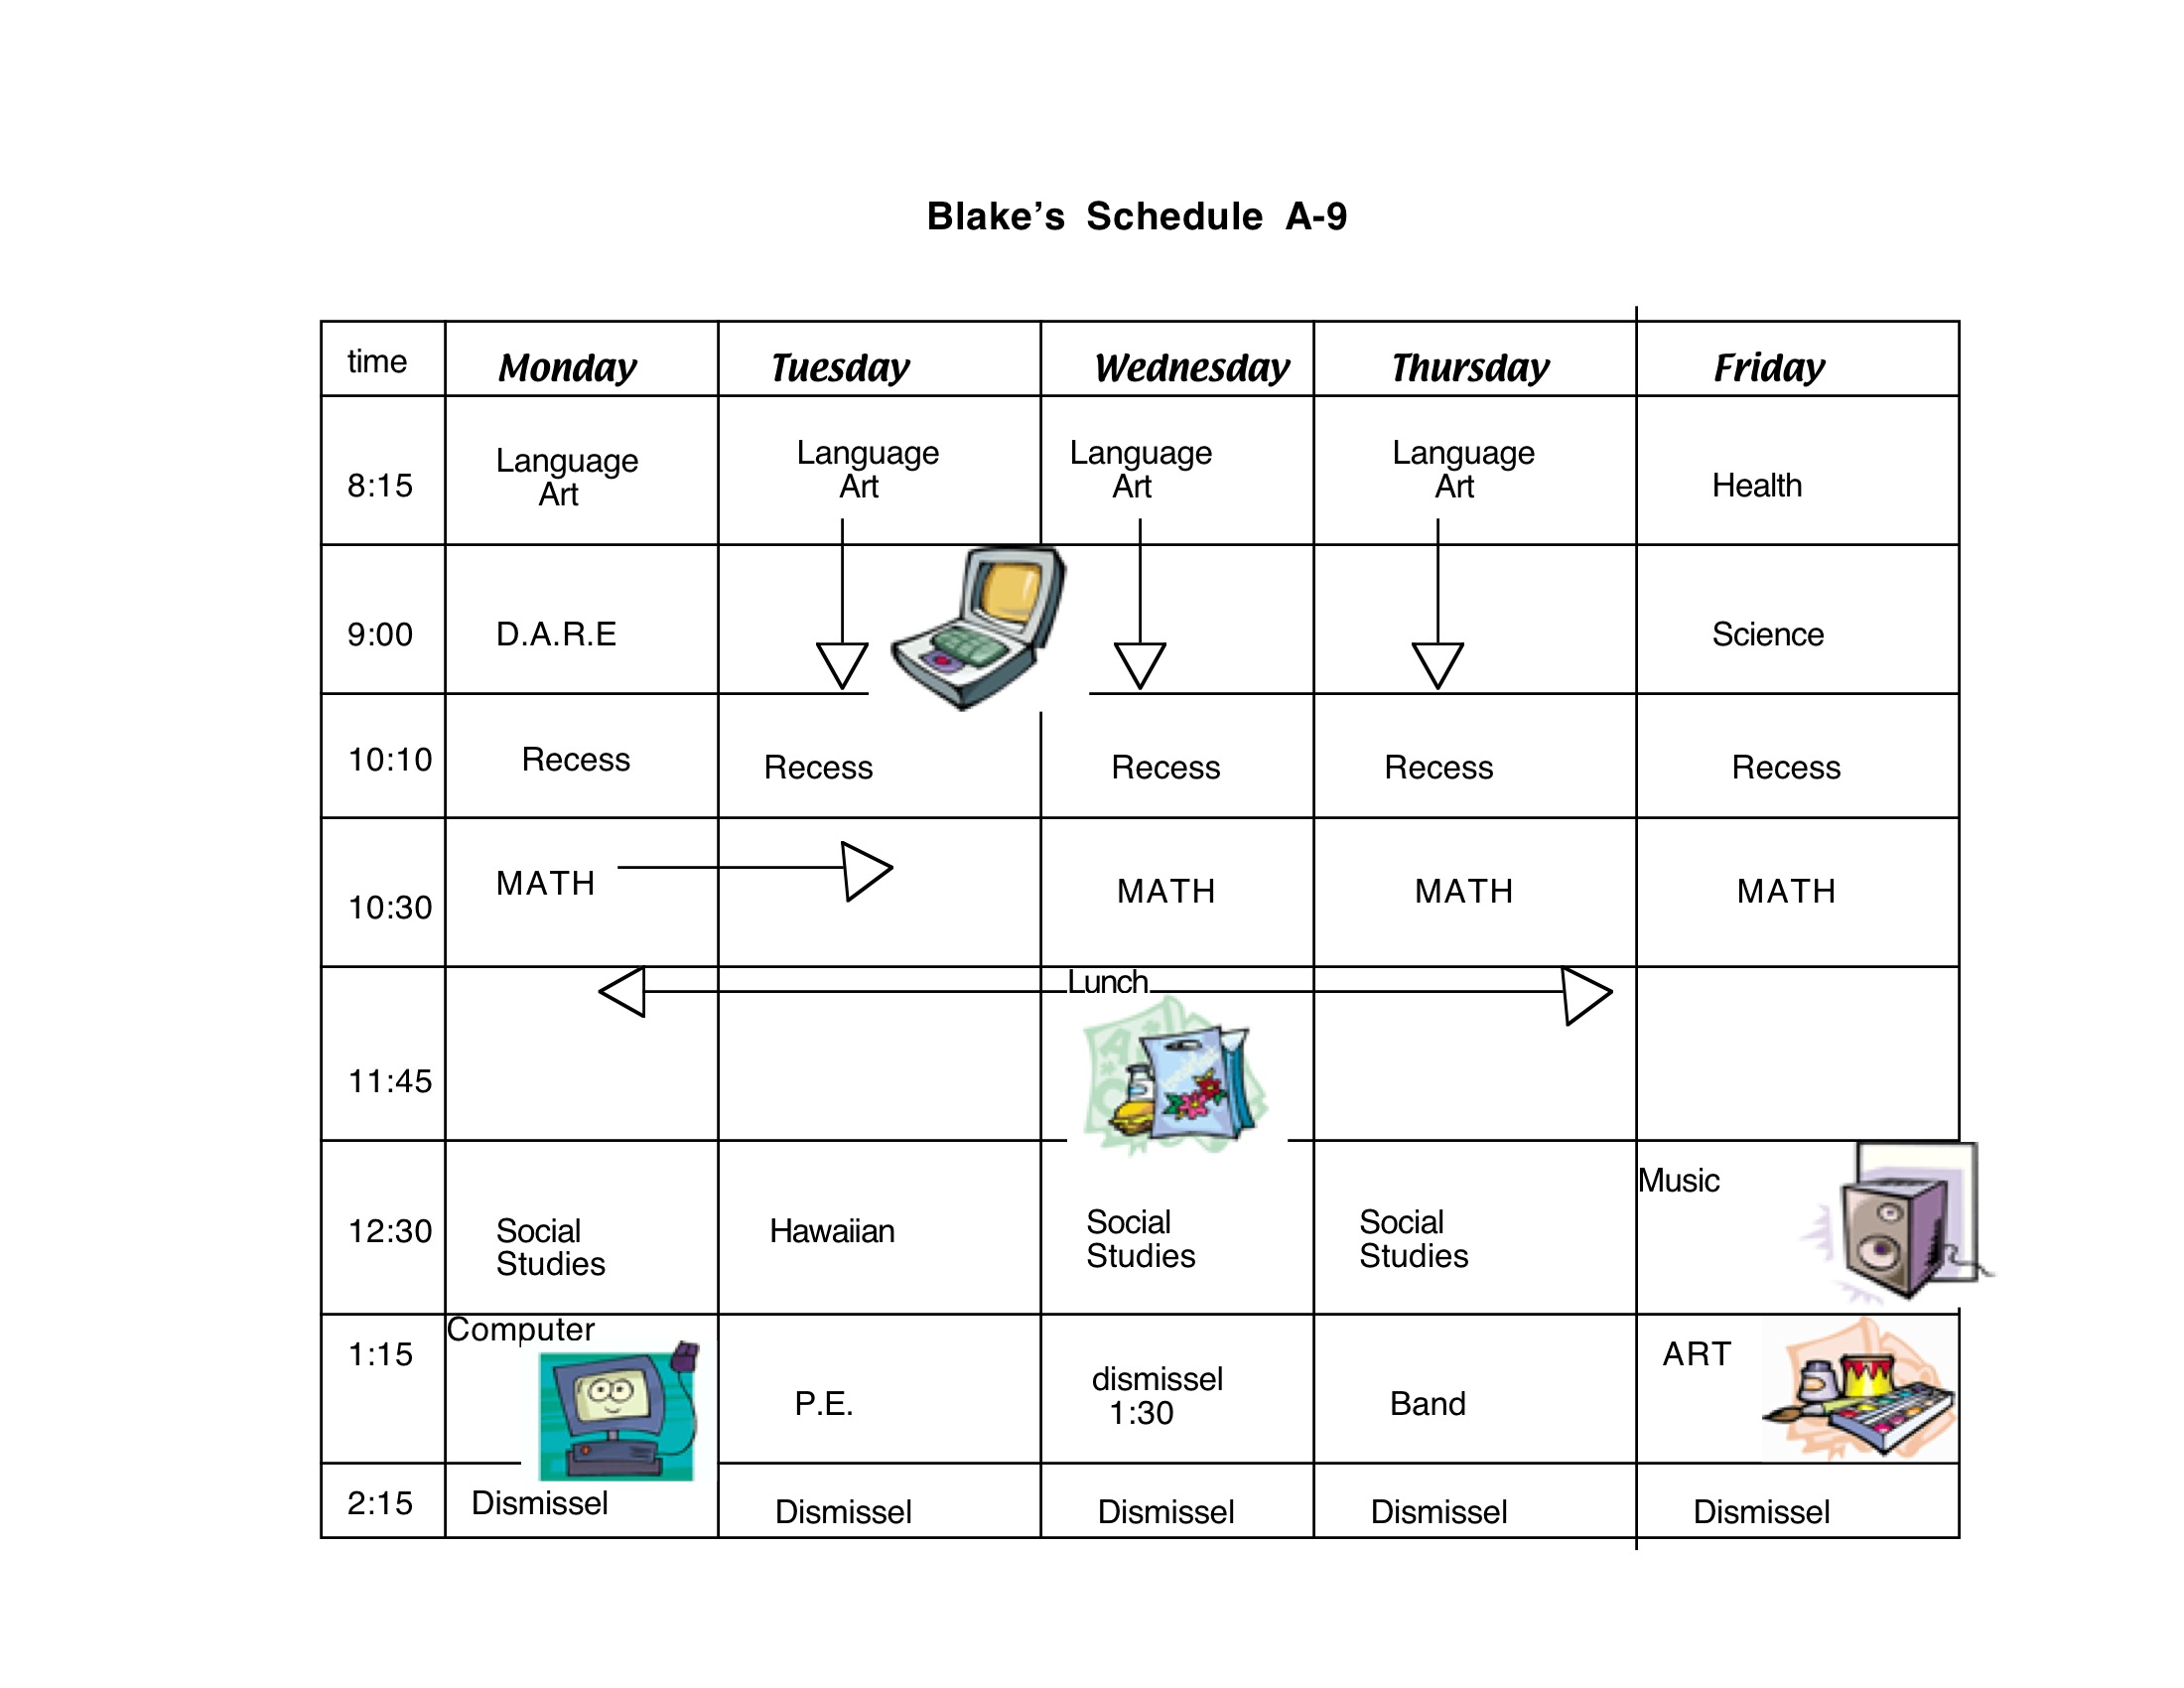 Class Schedule Then They Imported Clipart Images Into Their Schedule